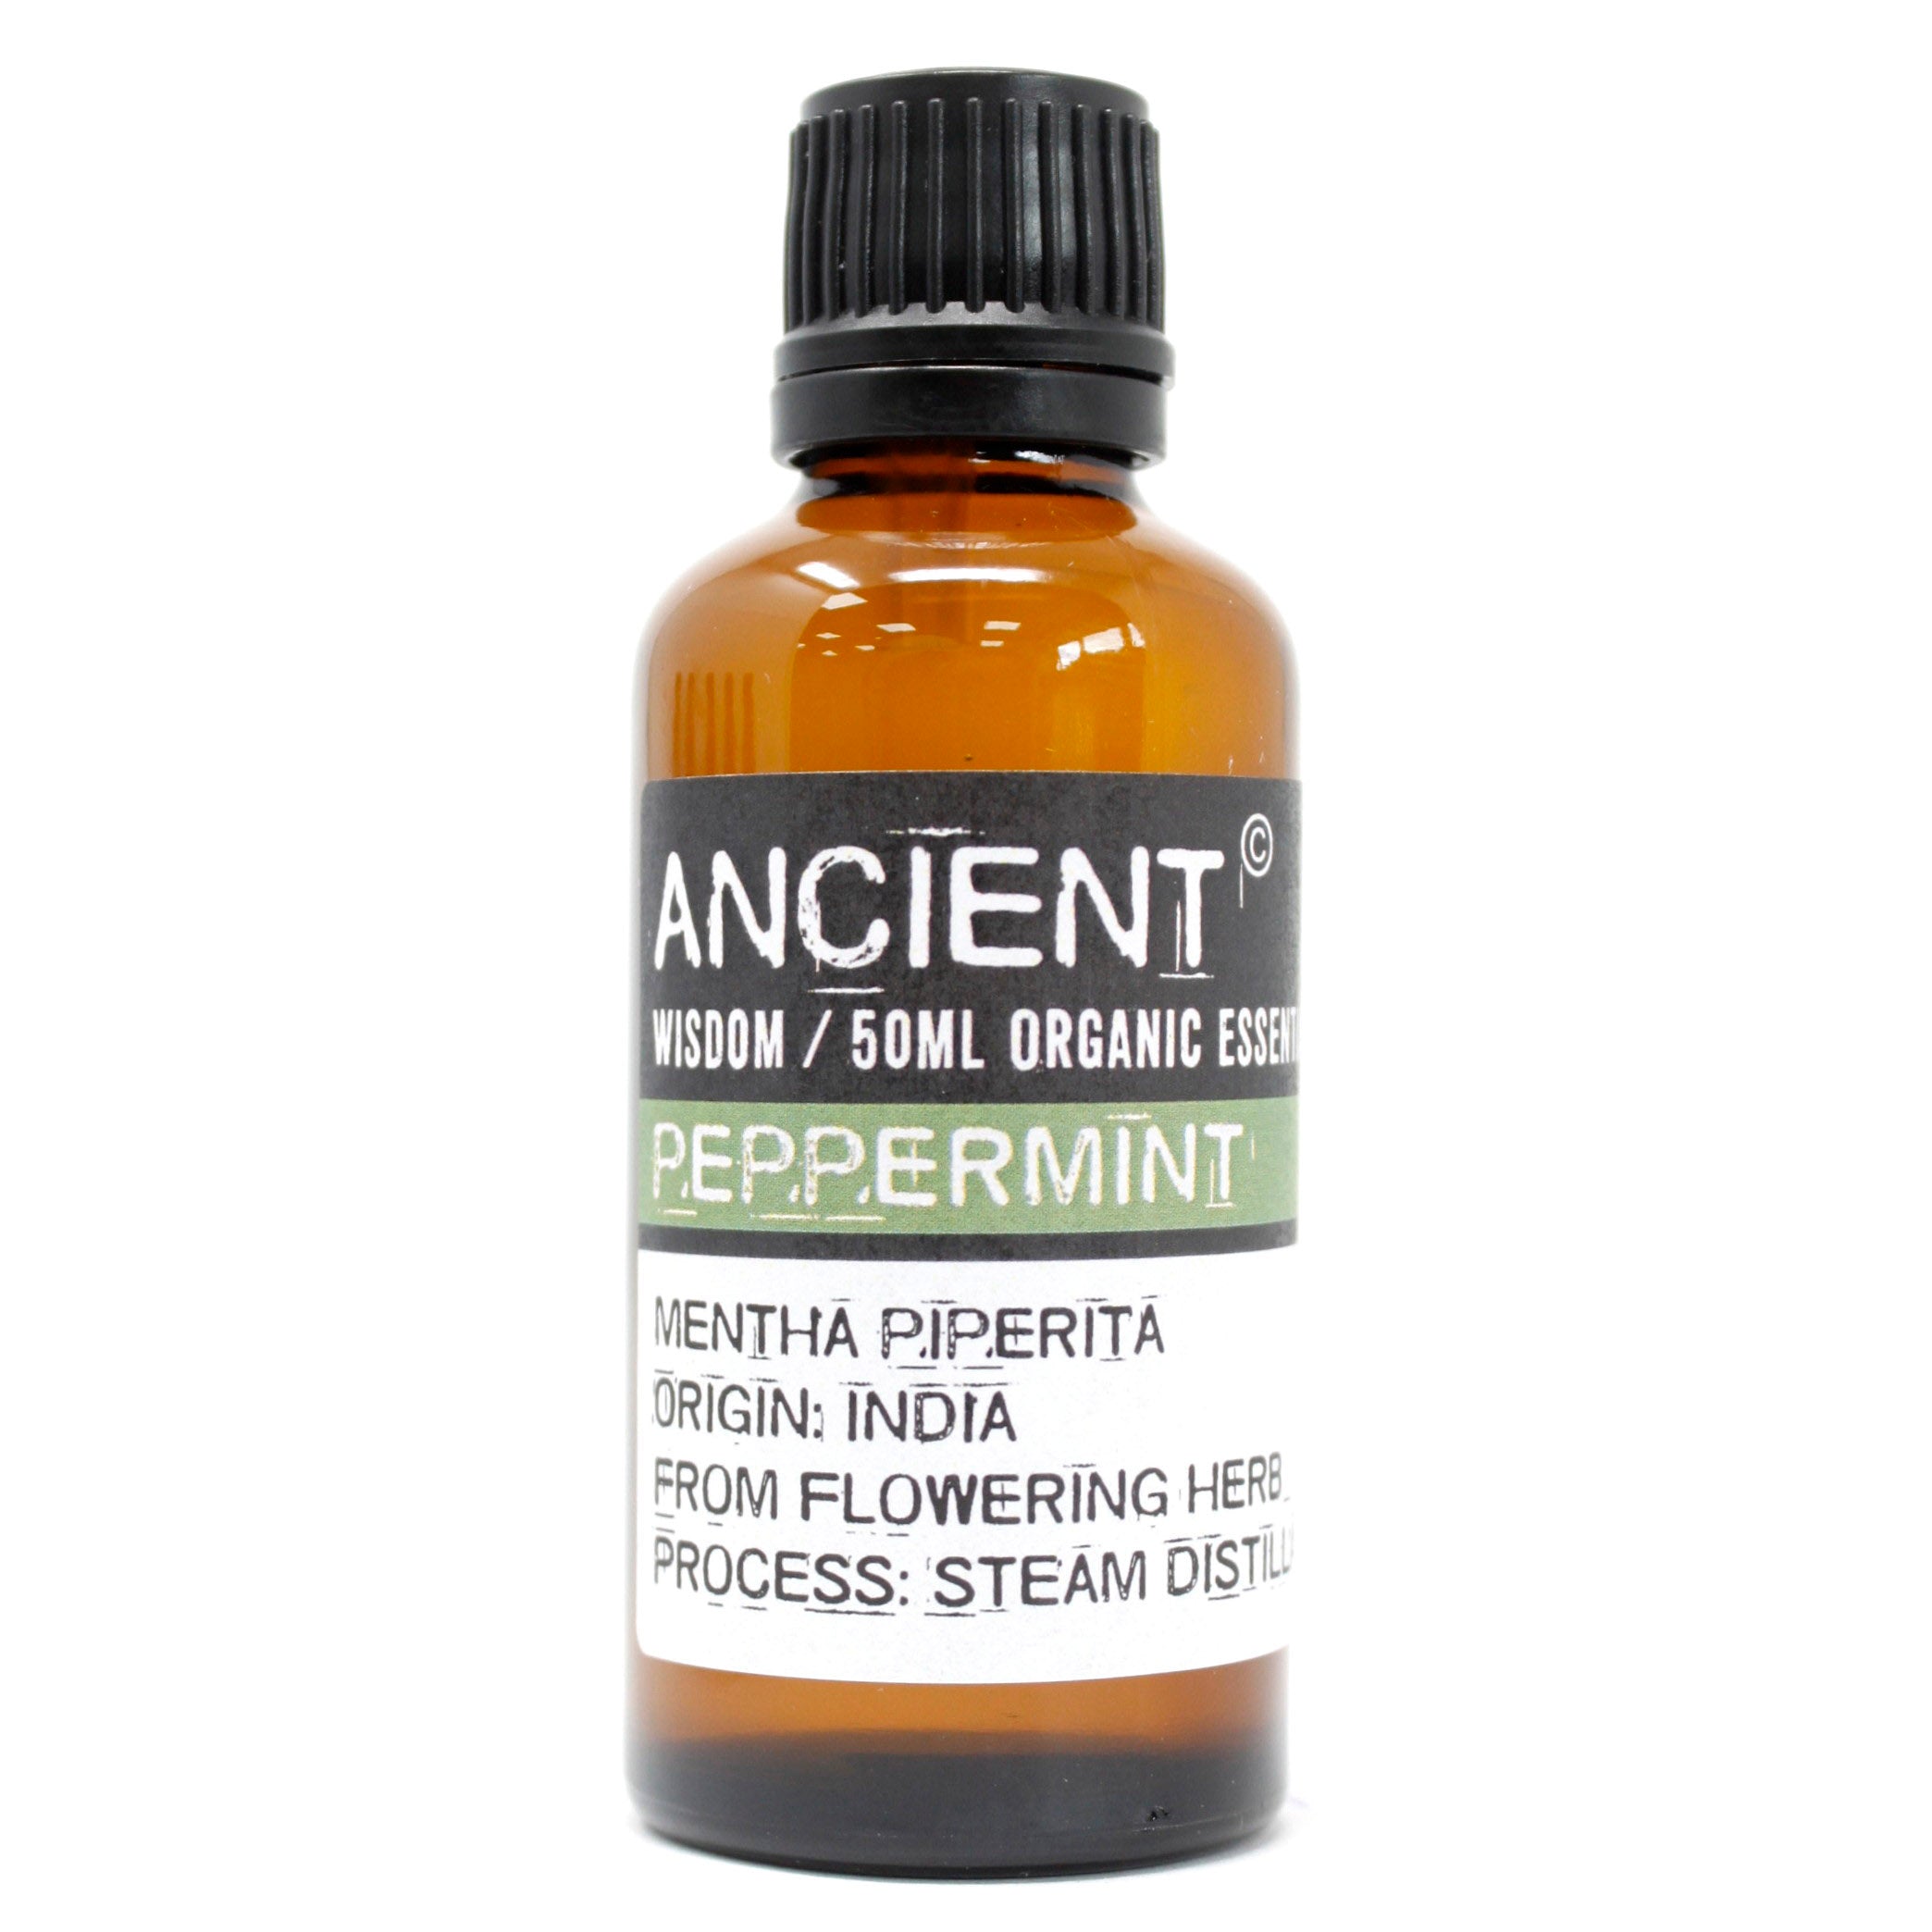 View Peppermint Organic Essential Oil 50ml information